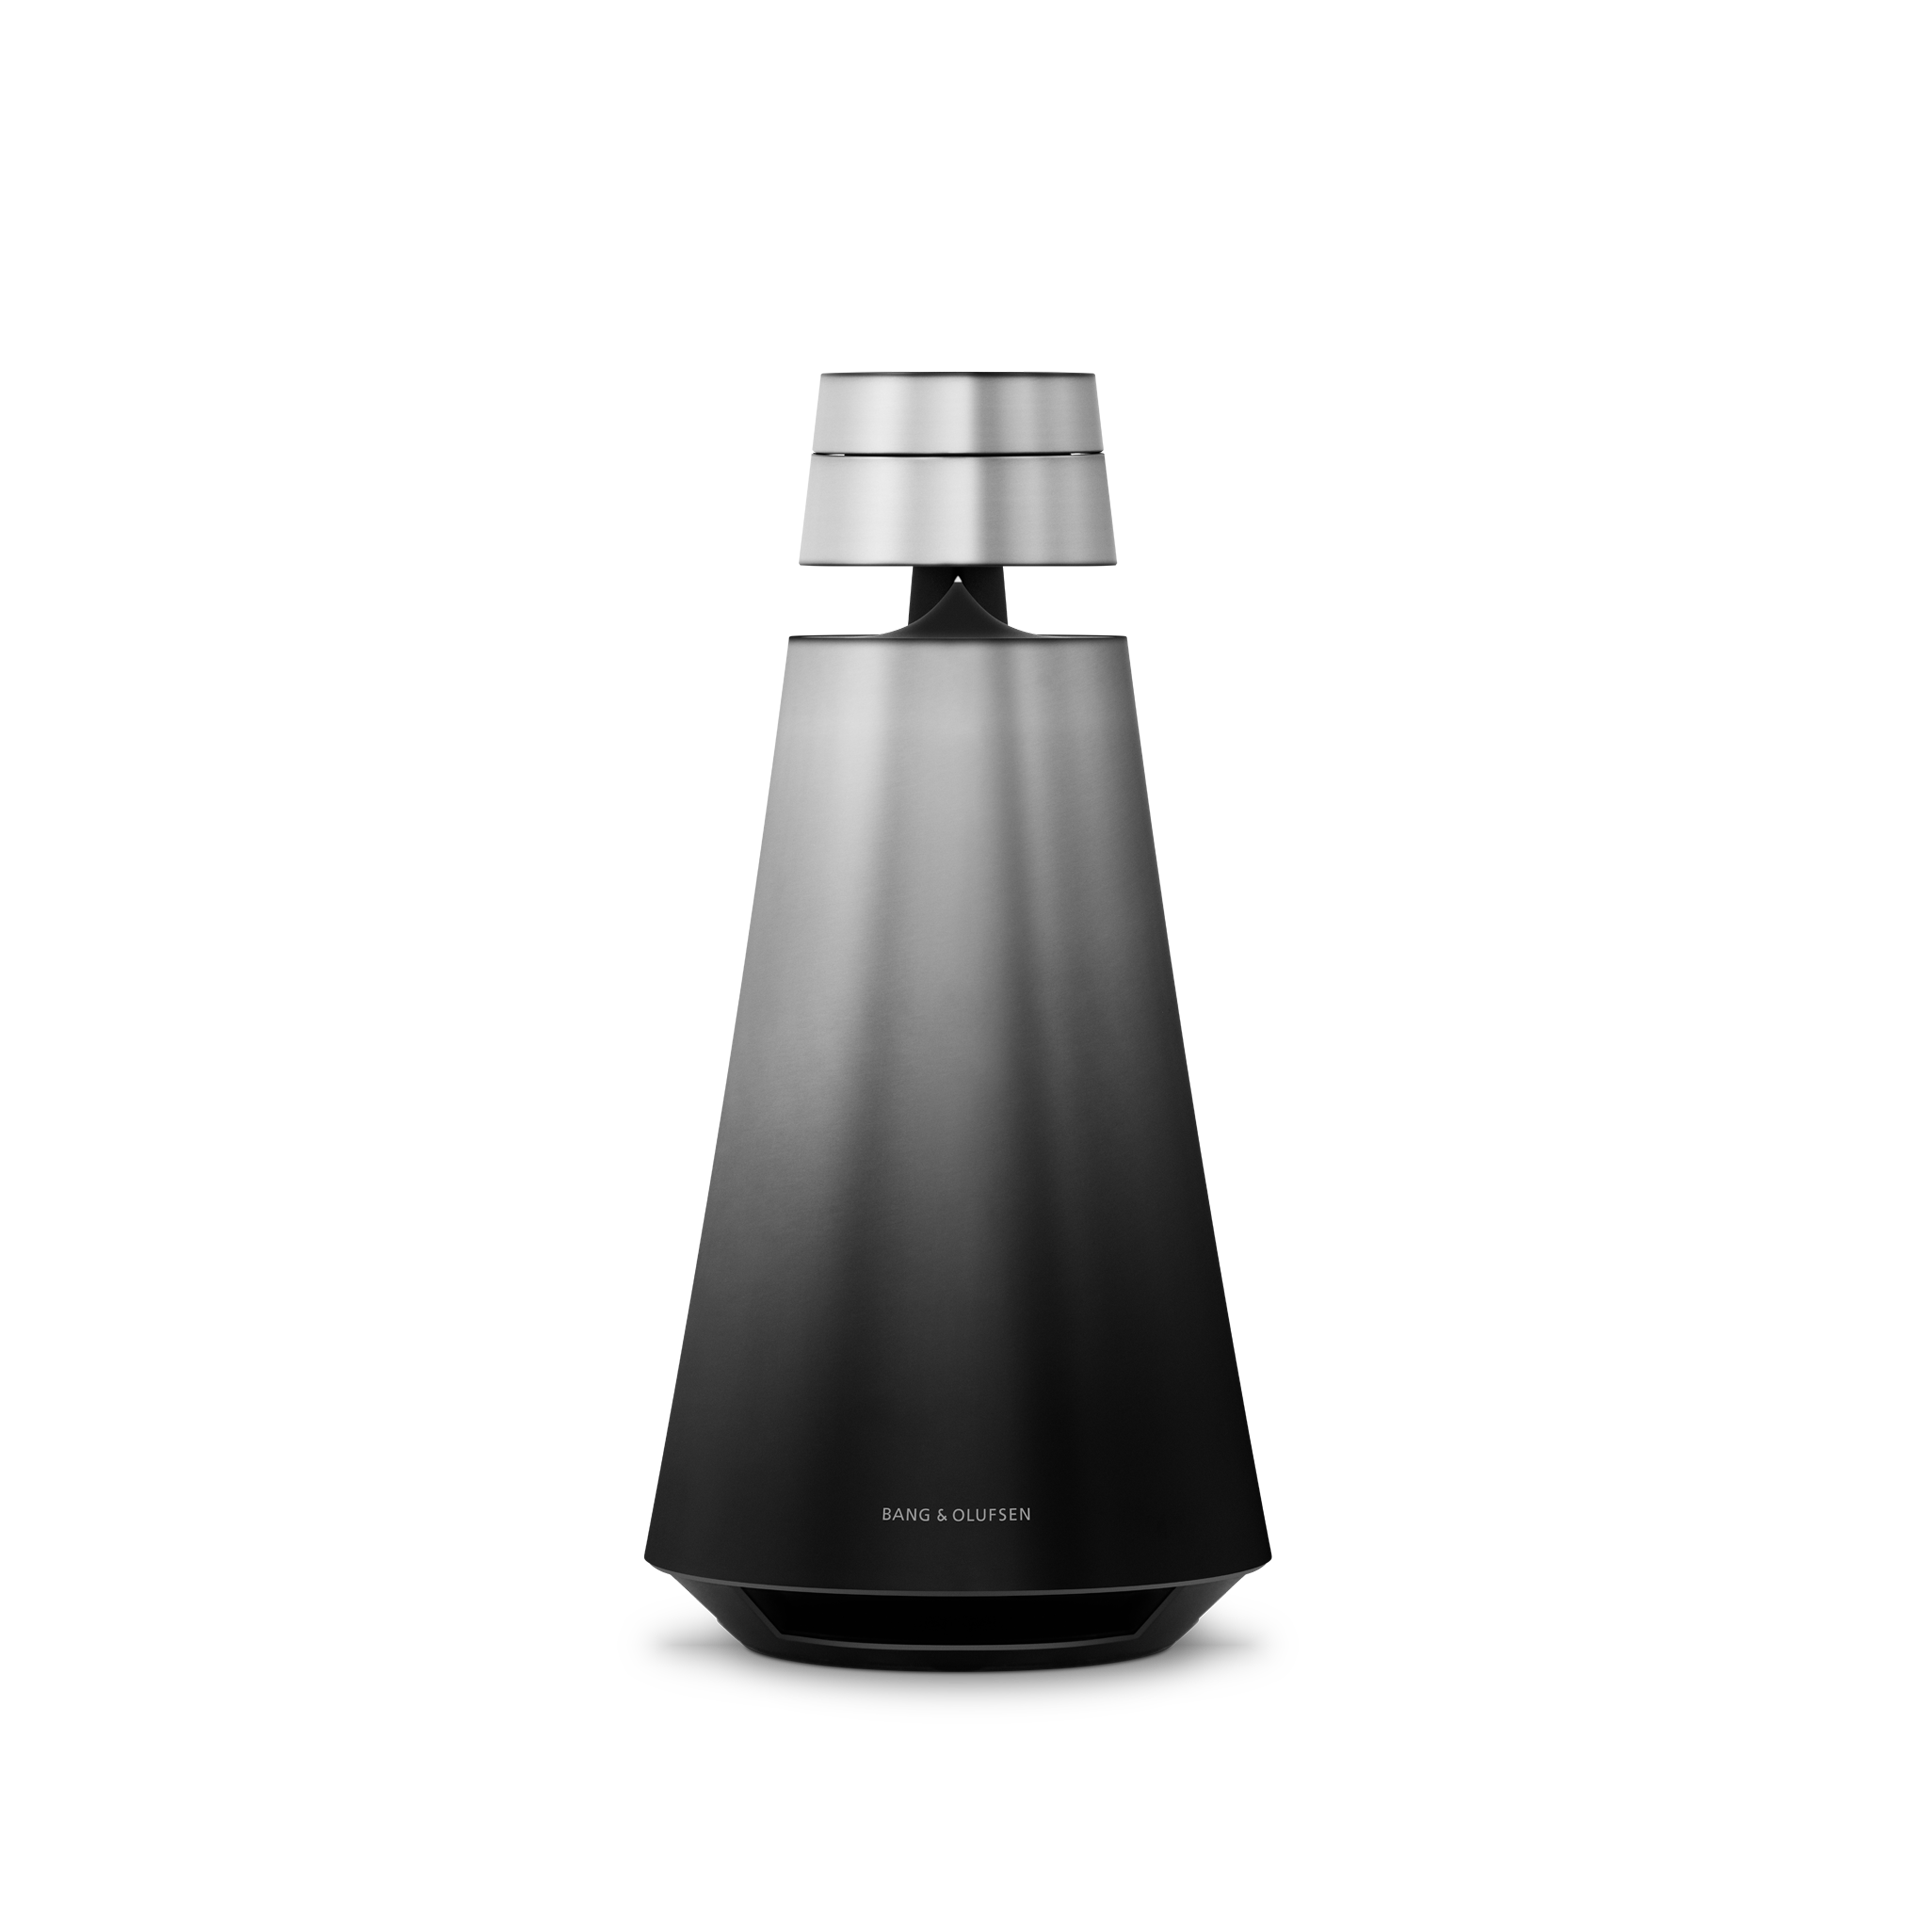 Beosound 1 - Connected Speakers Speakers